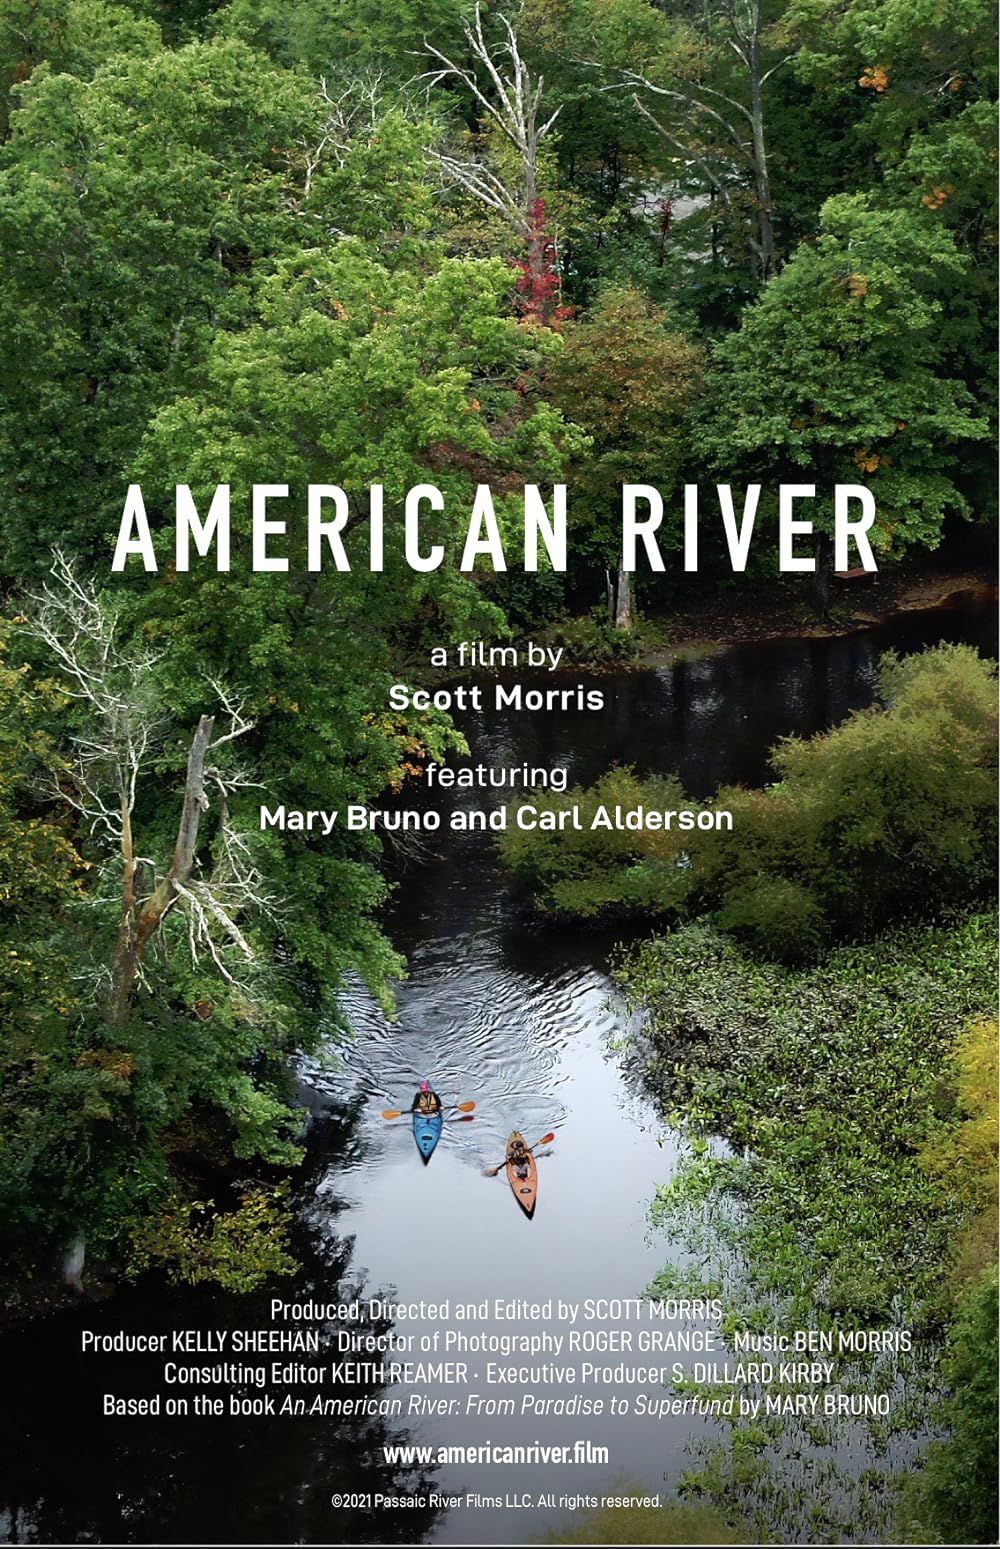 American River Film Showing at NC Trail Days